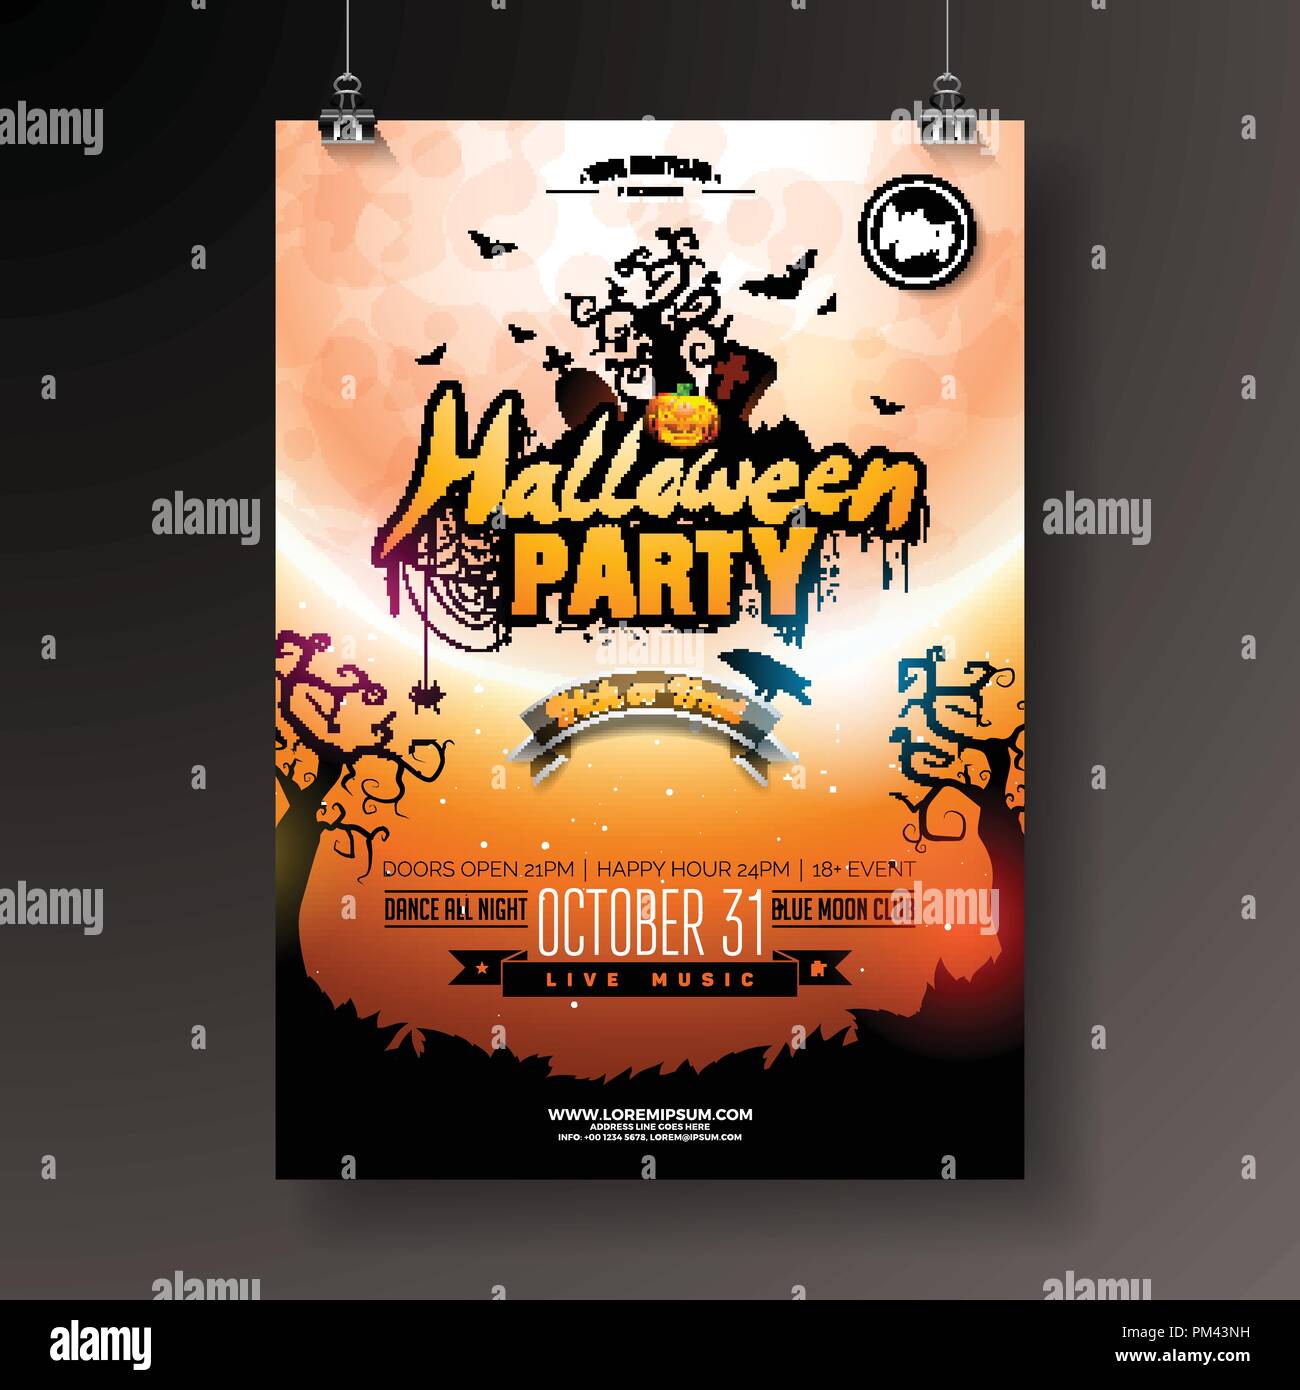 Halloween Party flyer vector illustration with pumpkin and bats on mysterious moon background. Holiday design template with spiders and cemetery for party invitation, greeting card, banner or celebration poster. Stock Vector